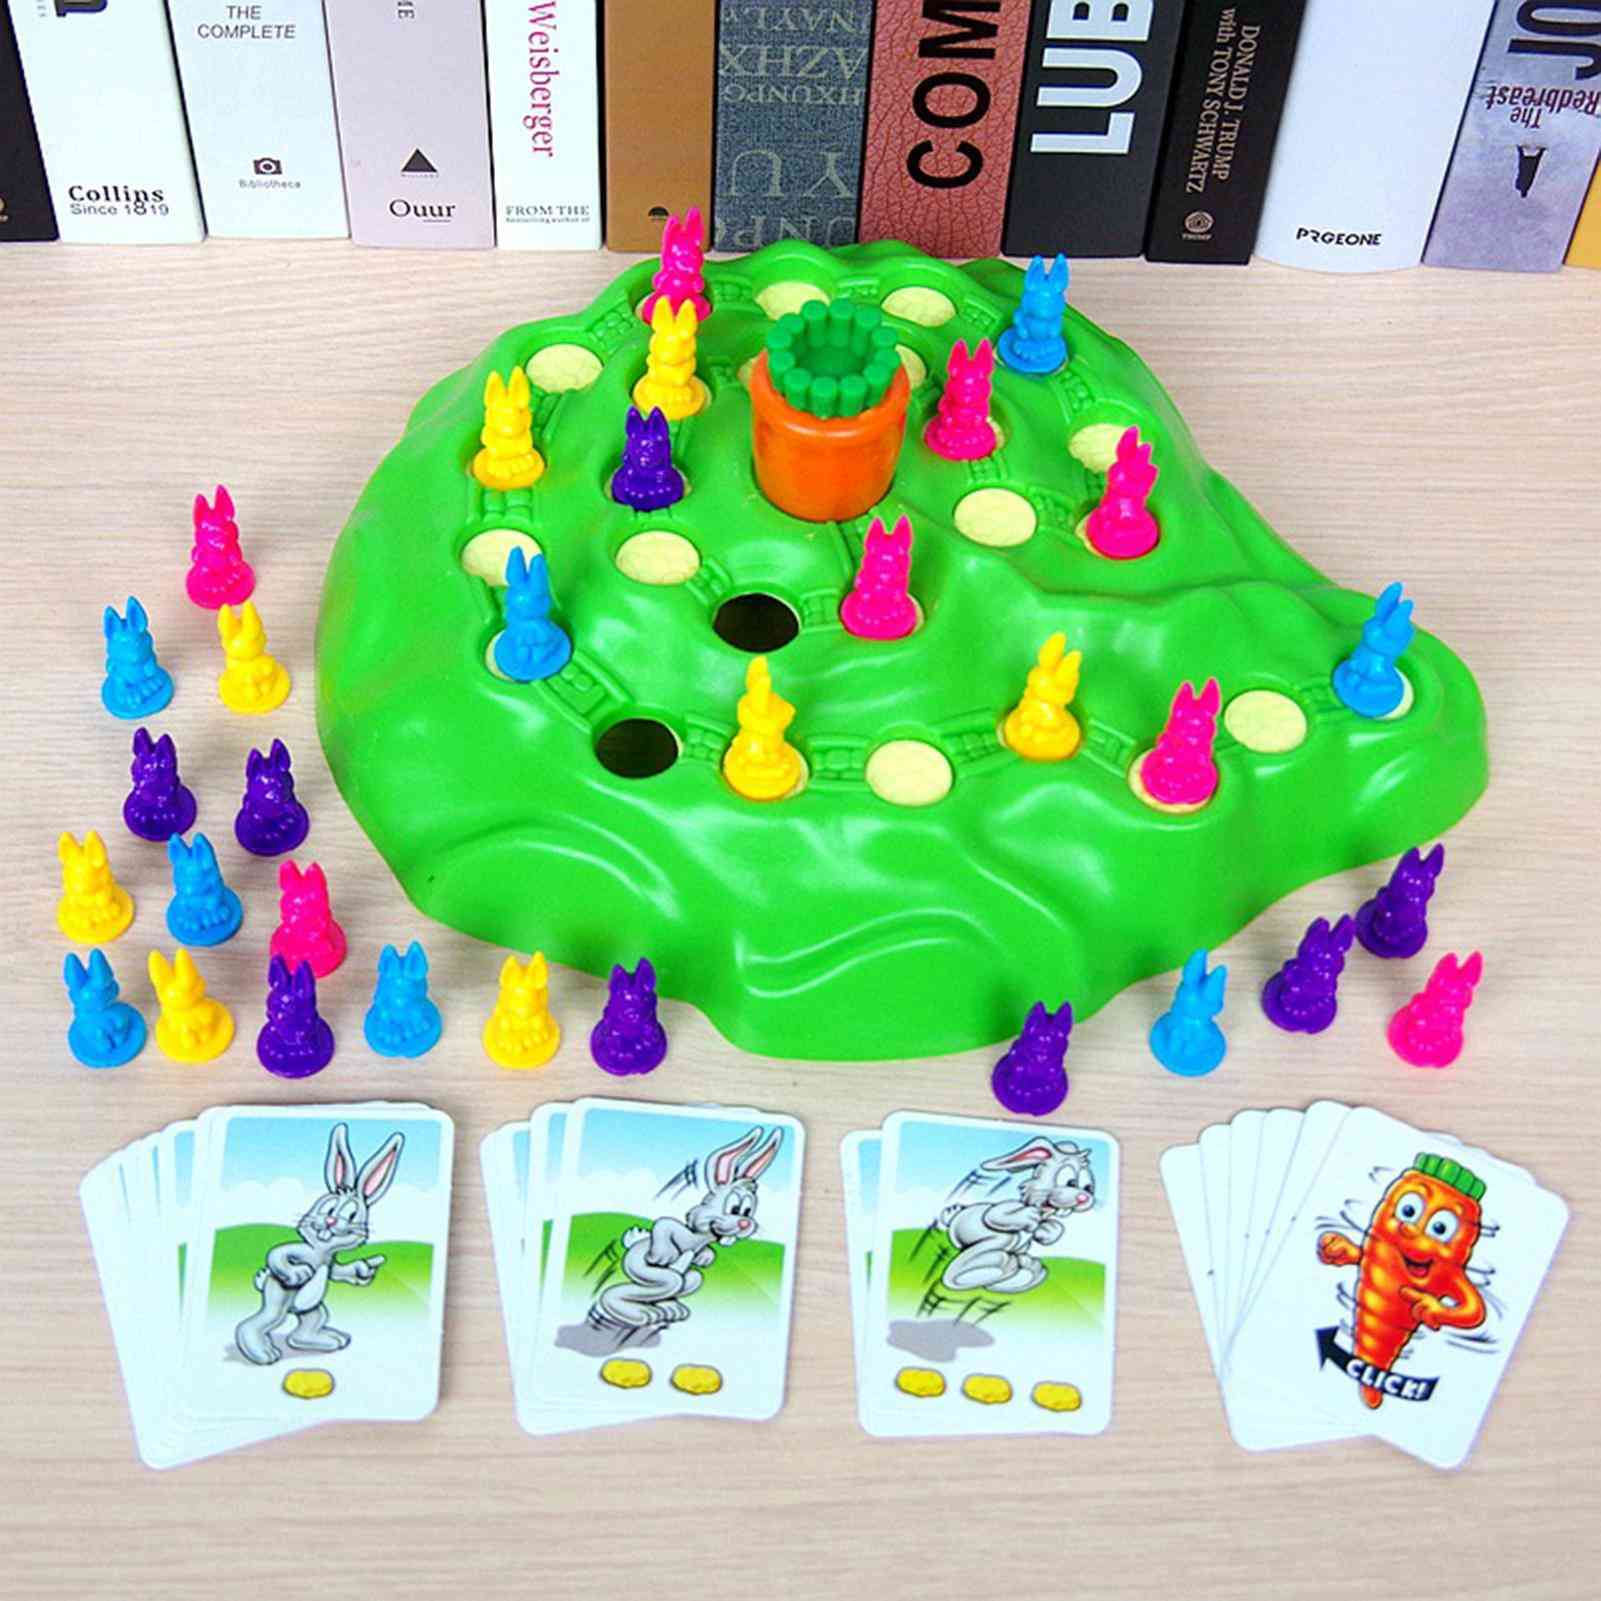 Chess Carrot Adventure Parent Interactive Intelligence Educational Toy